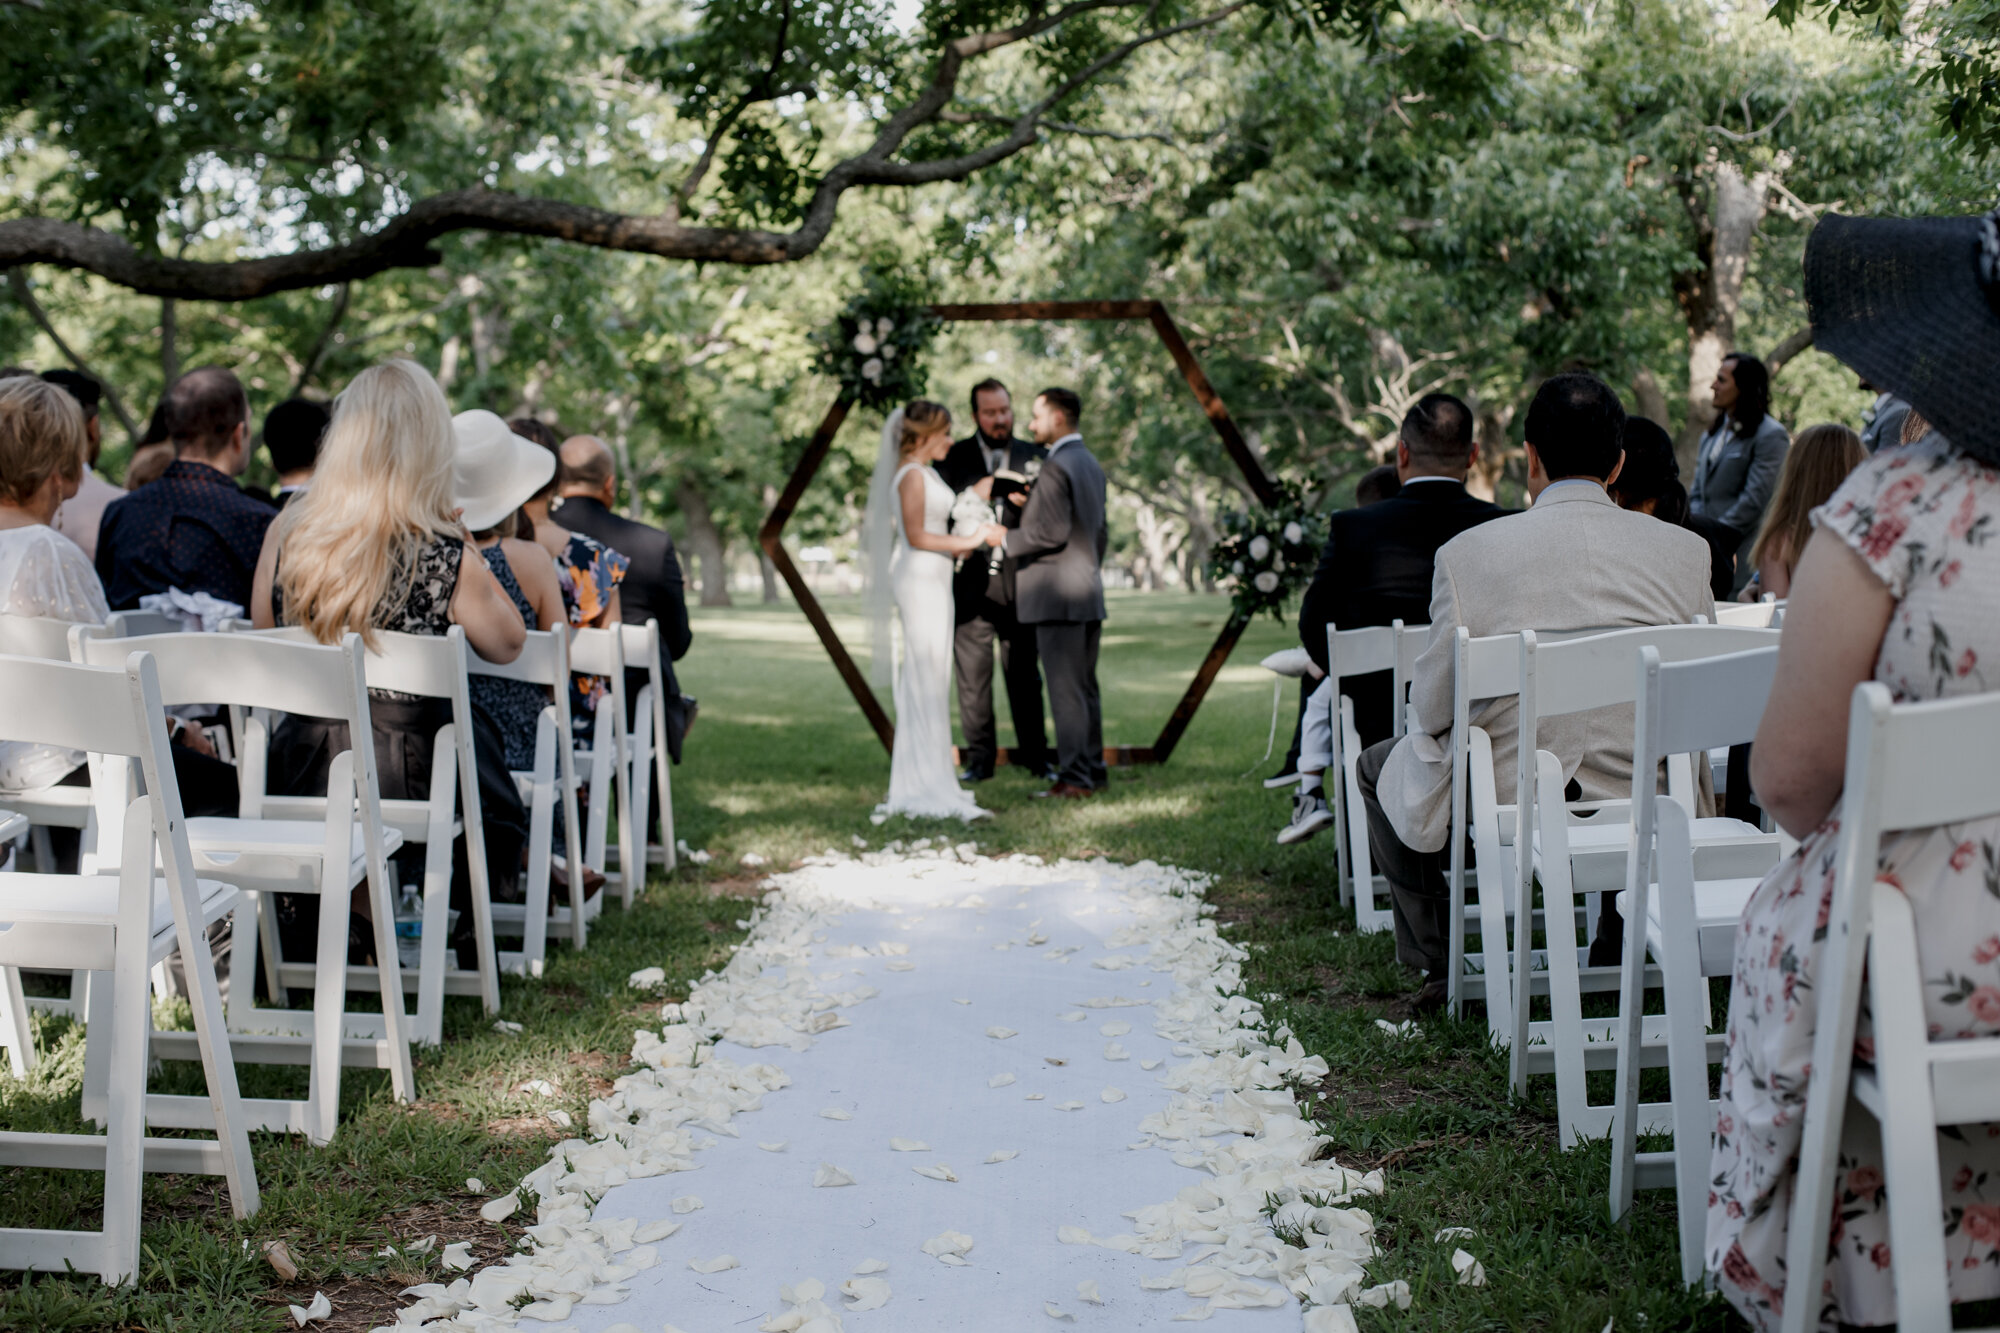 Glowing Wedding Ceremony in Golden Champagne Tones at The Orchard at Caney Creek in Wharton, TX